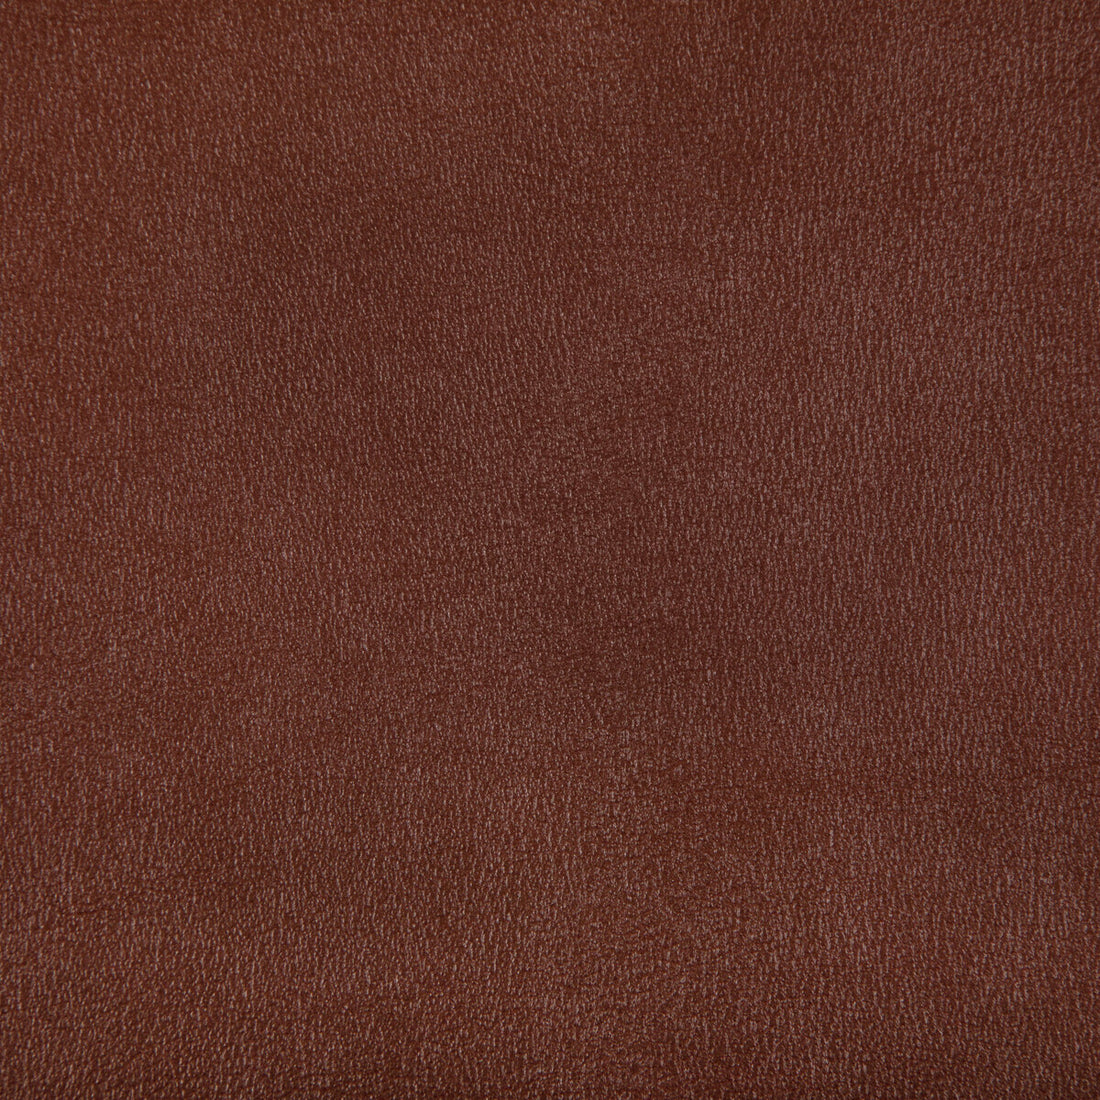 Agatha fabric in copper color - pattern AGATHA.6.0 - by Kravet Contract